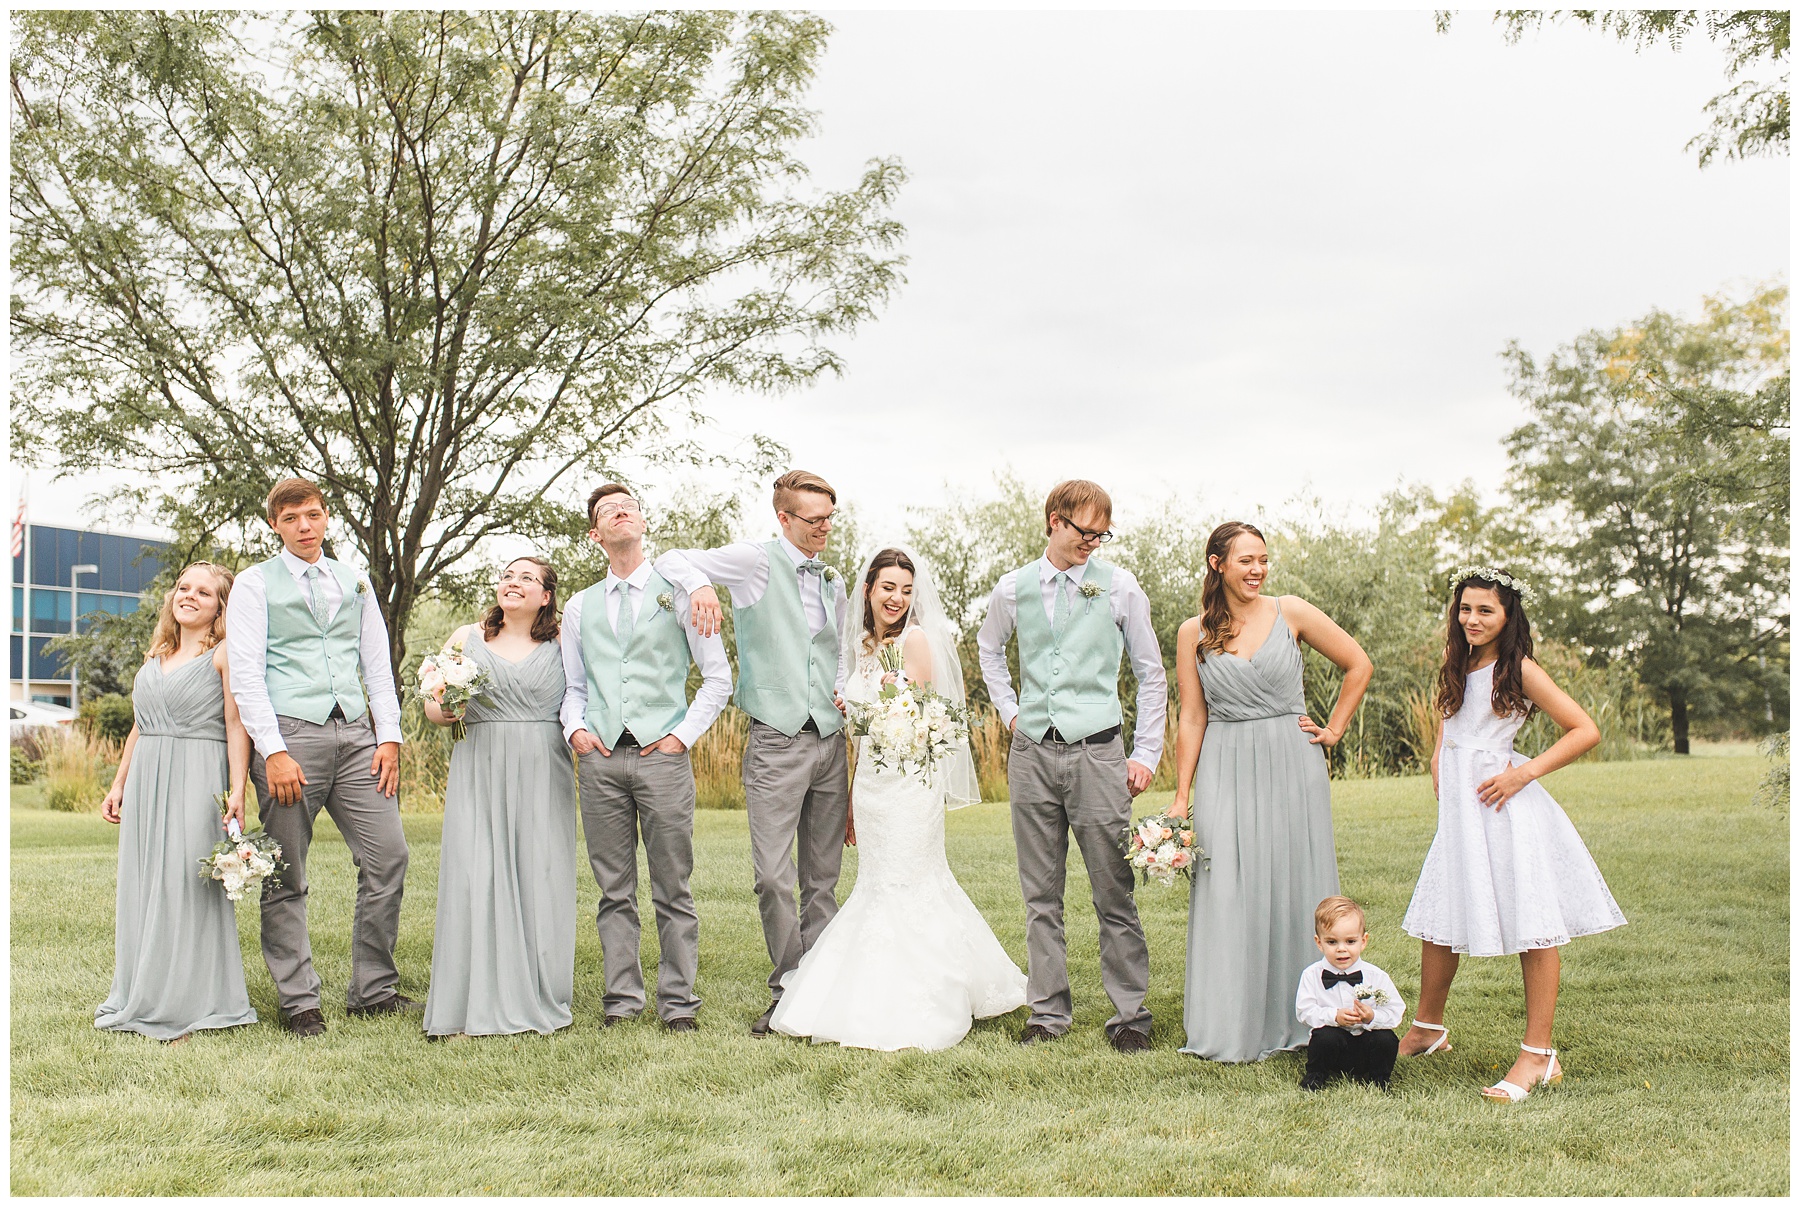 Wedding party in gray, sage, and white Cloudy wedding day